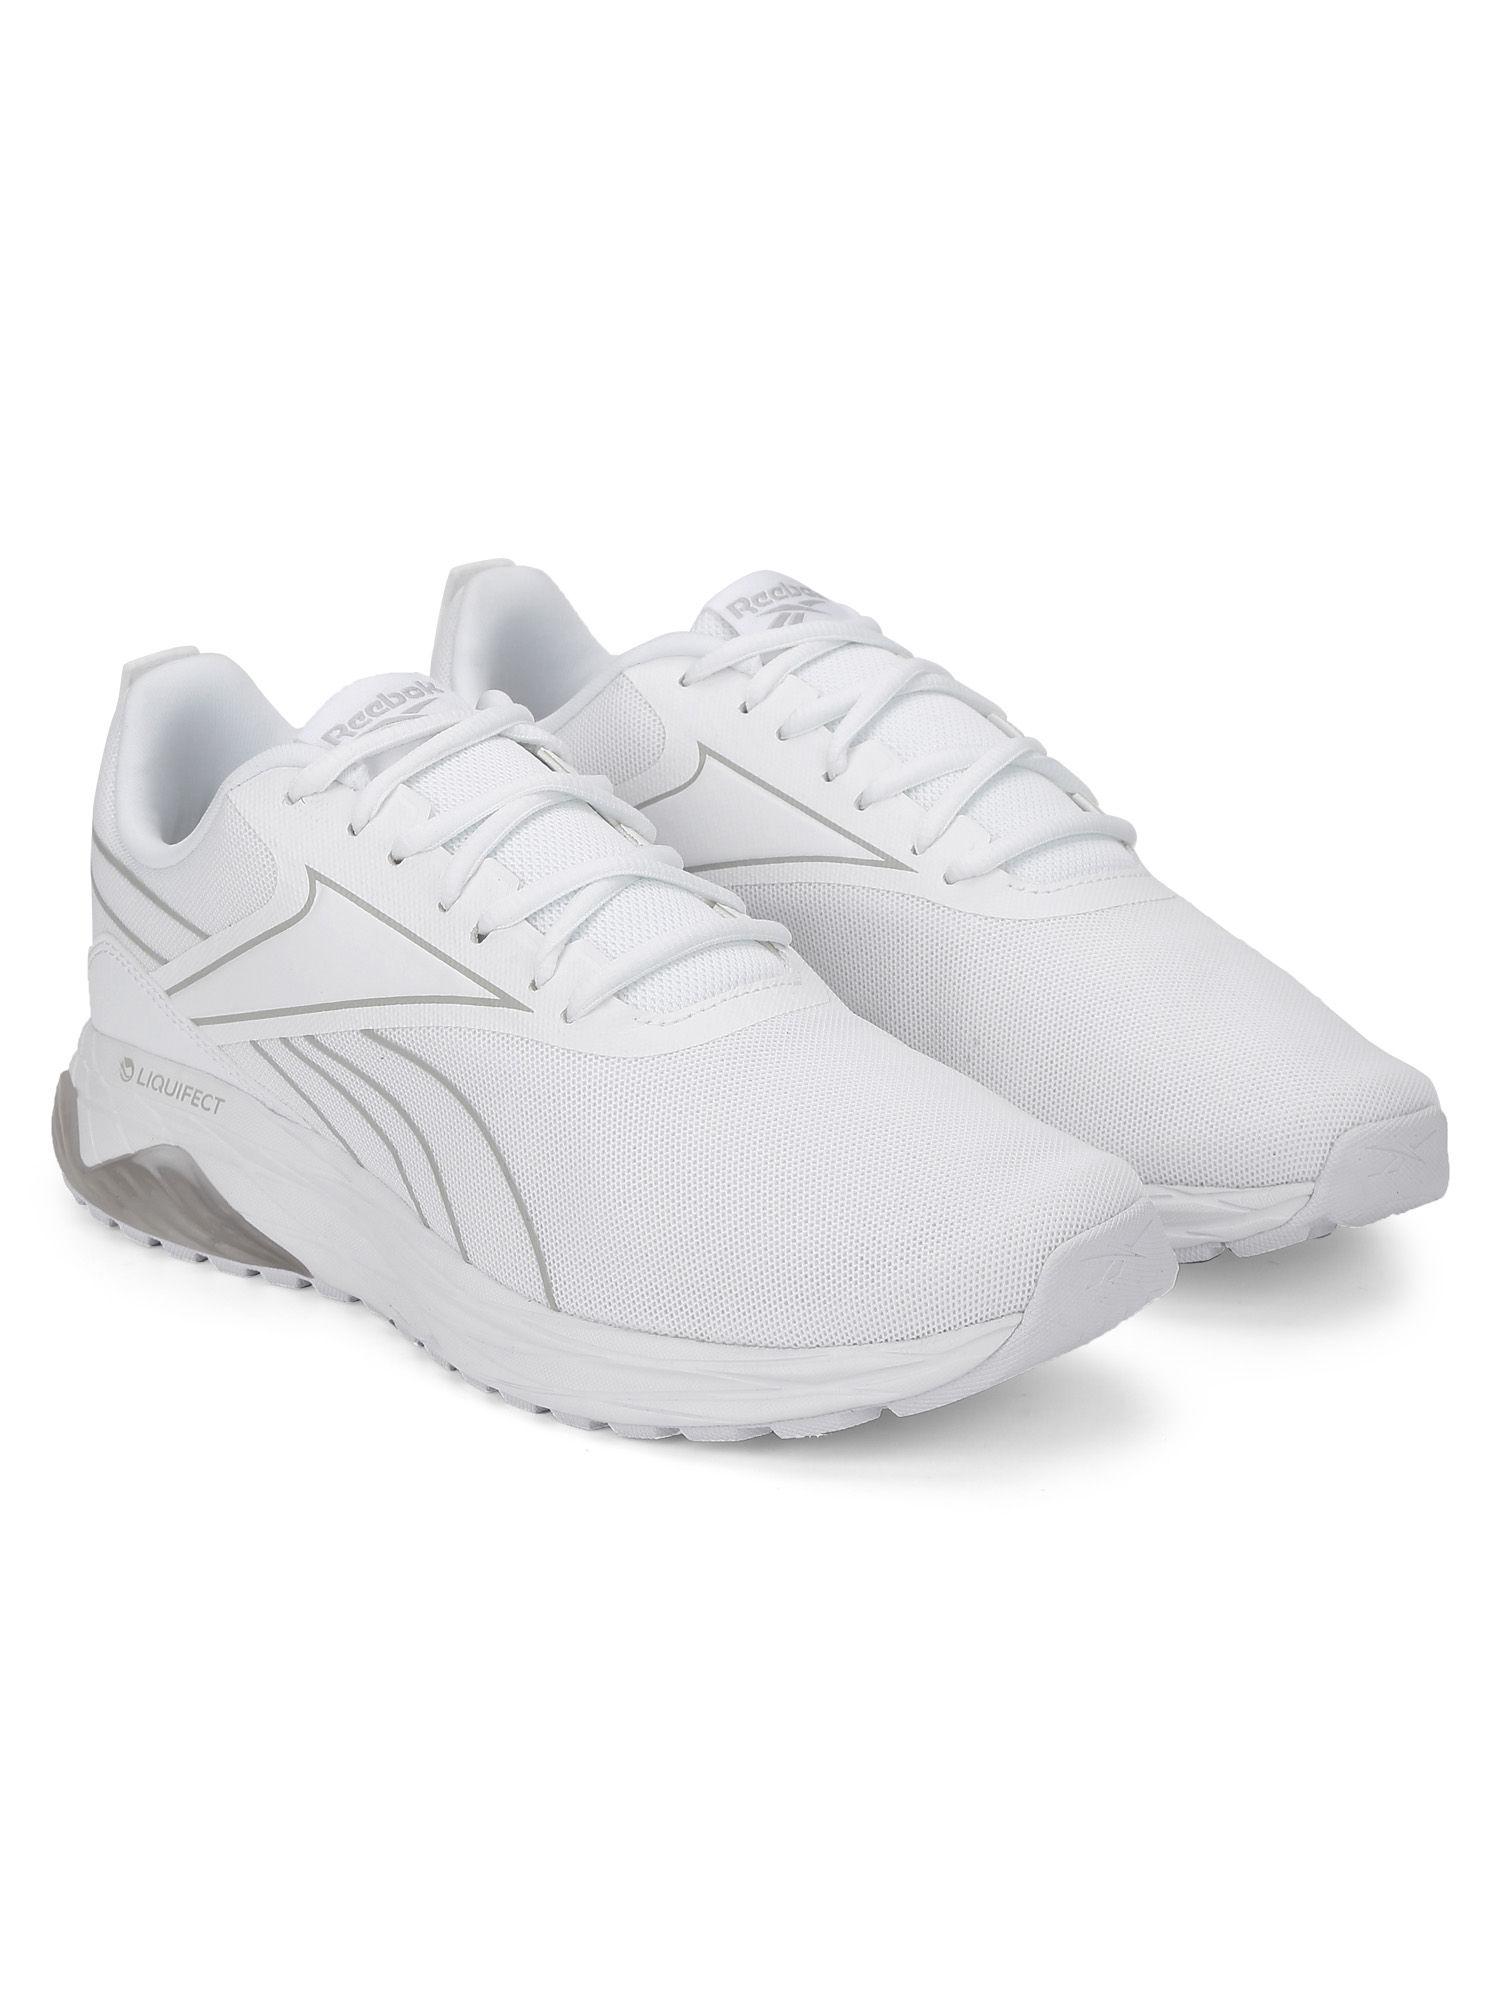 liquifect 180 2.0 white running shoes